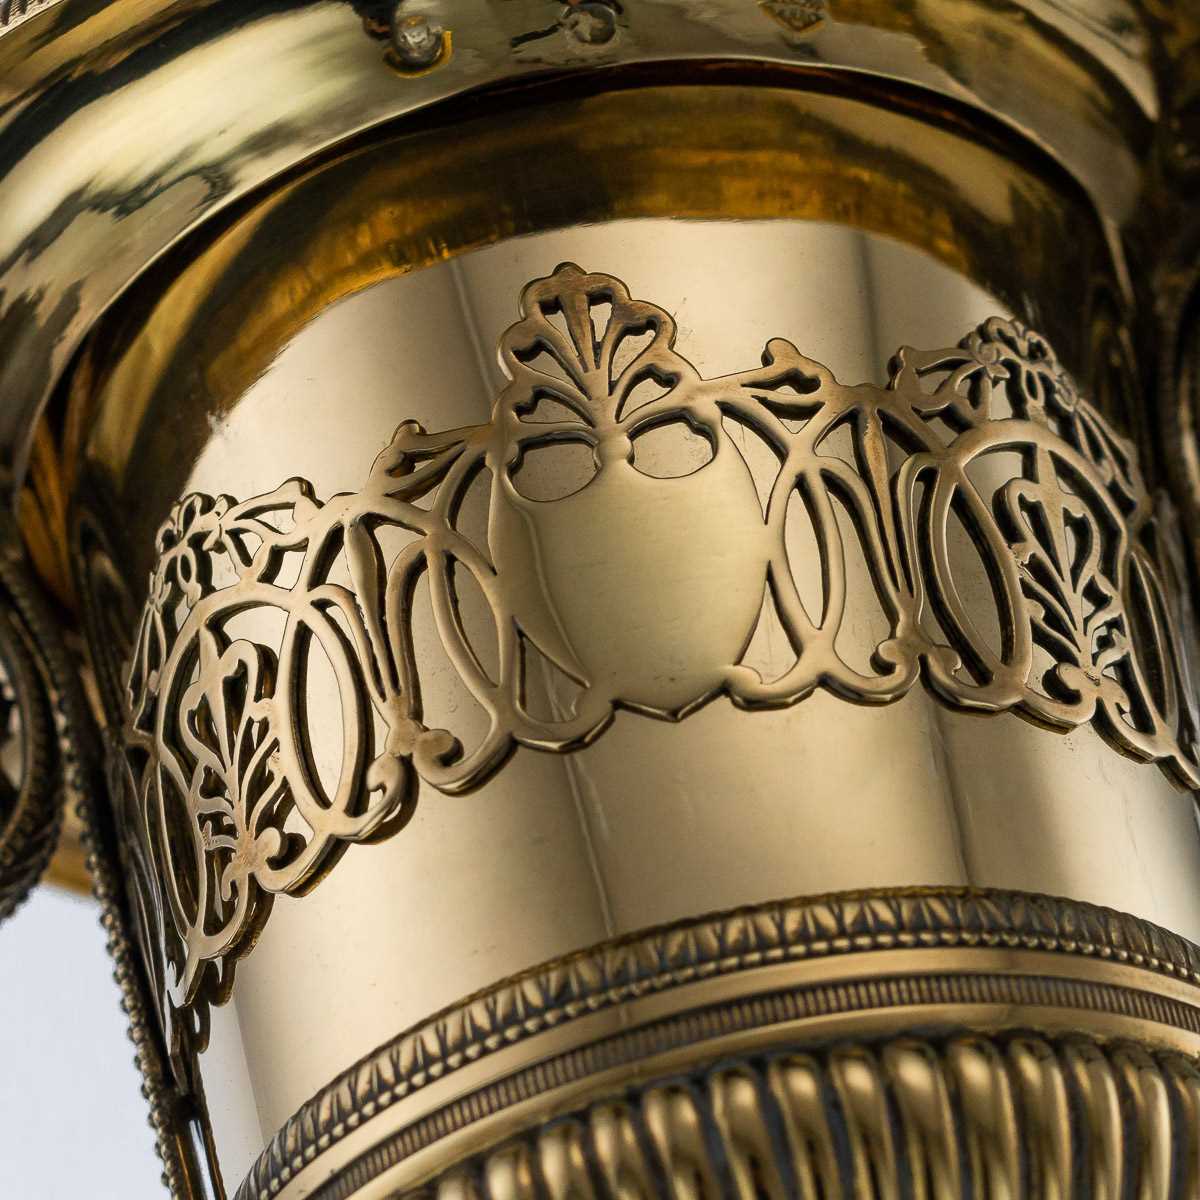 AN EARLY 19TH CENTURY SILVER GILT URN BY MARC JACQUART, PARIS - Image 15 of 19